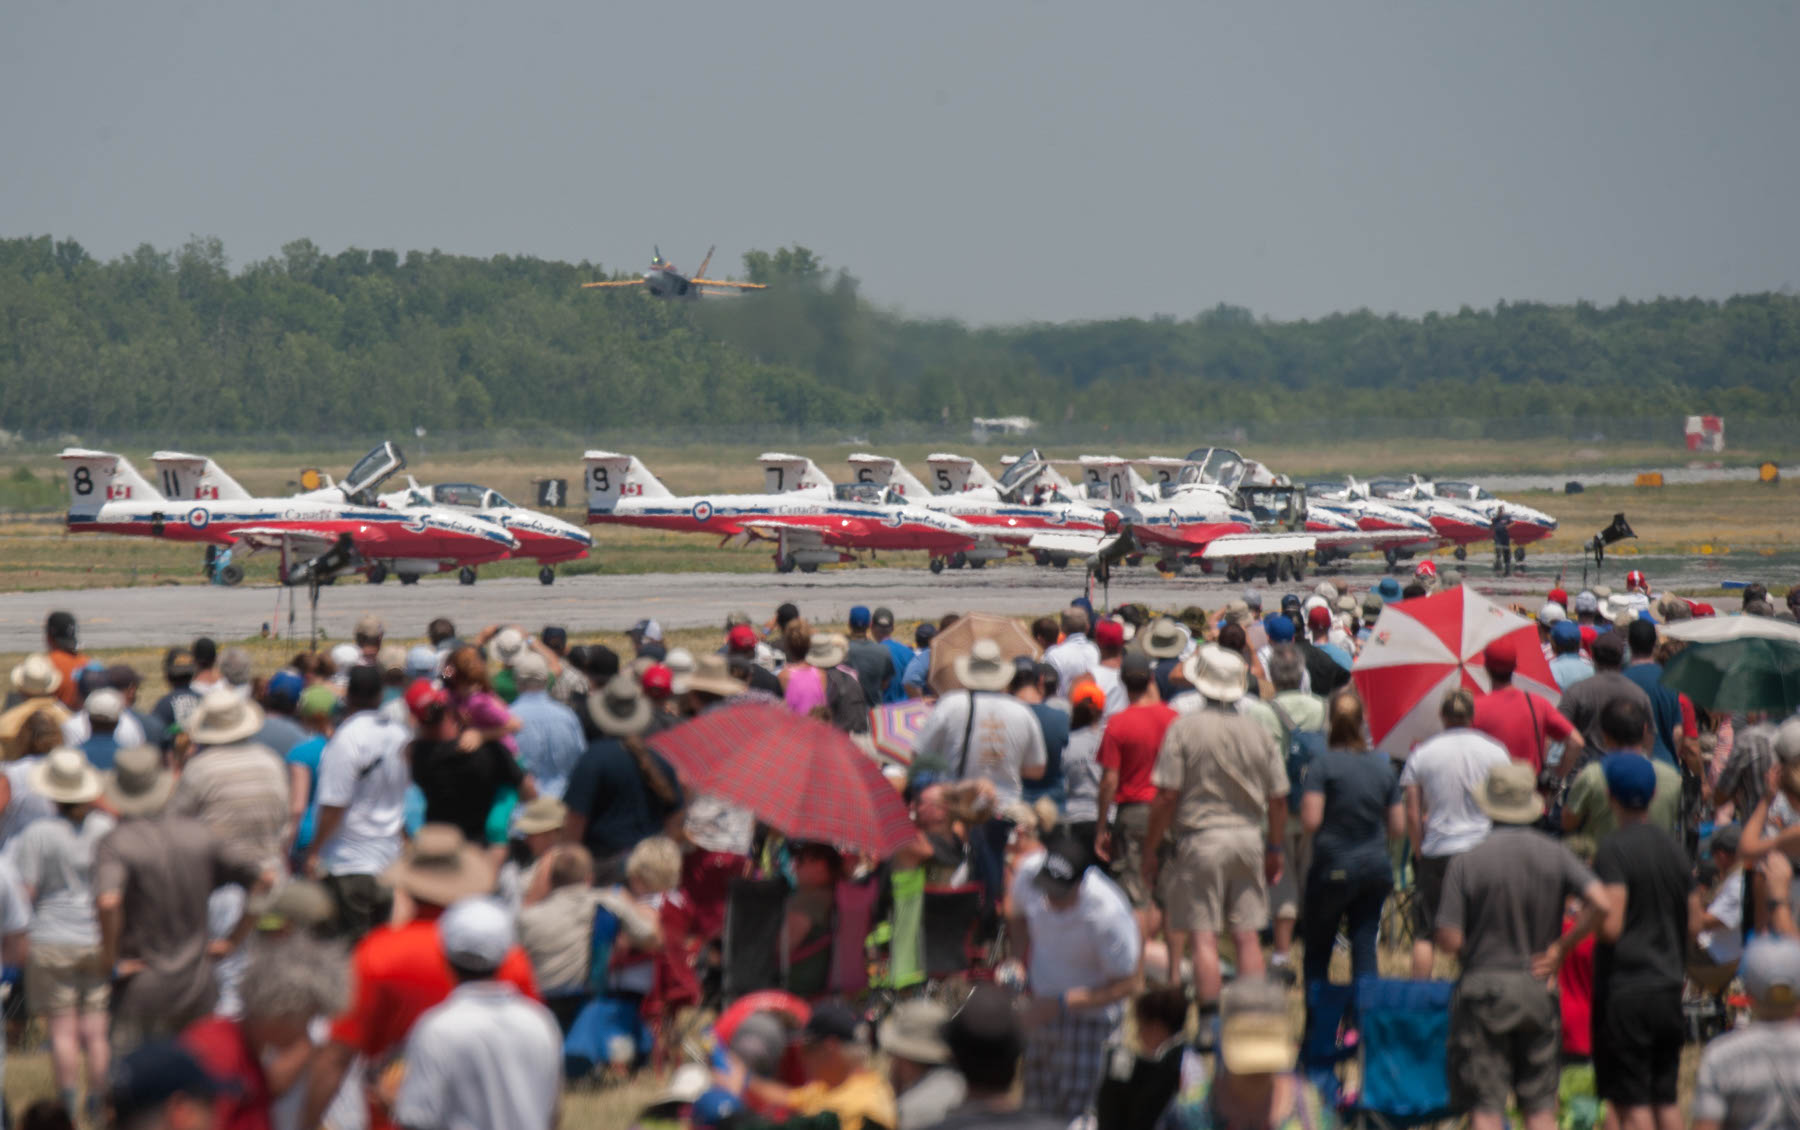 a crowd of air show attendees watching the planes lining up on the runway